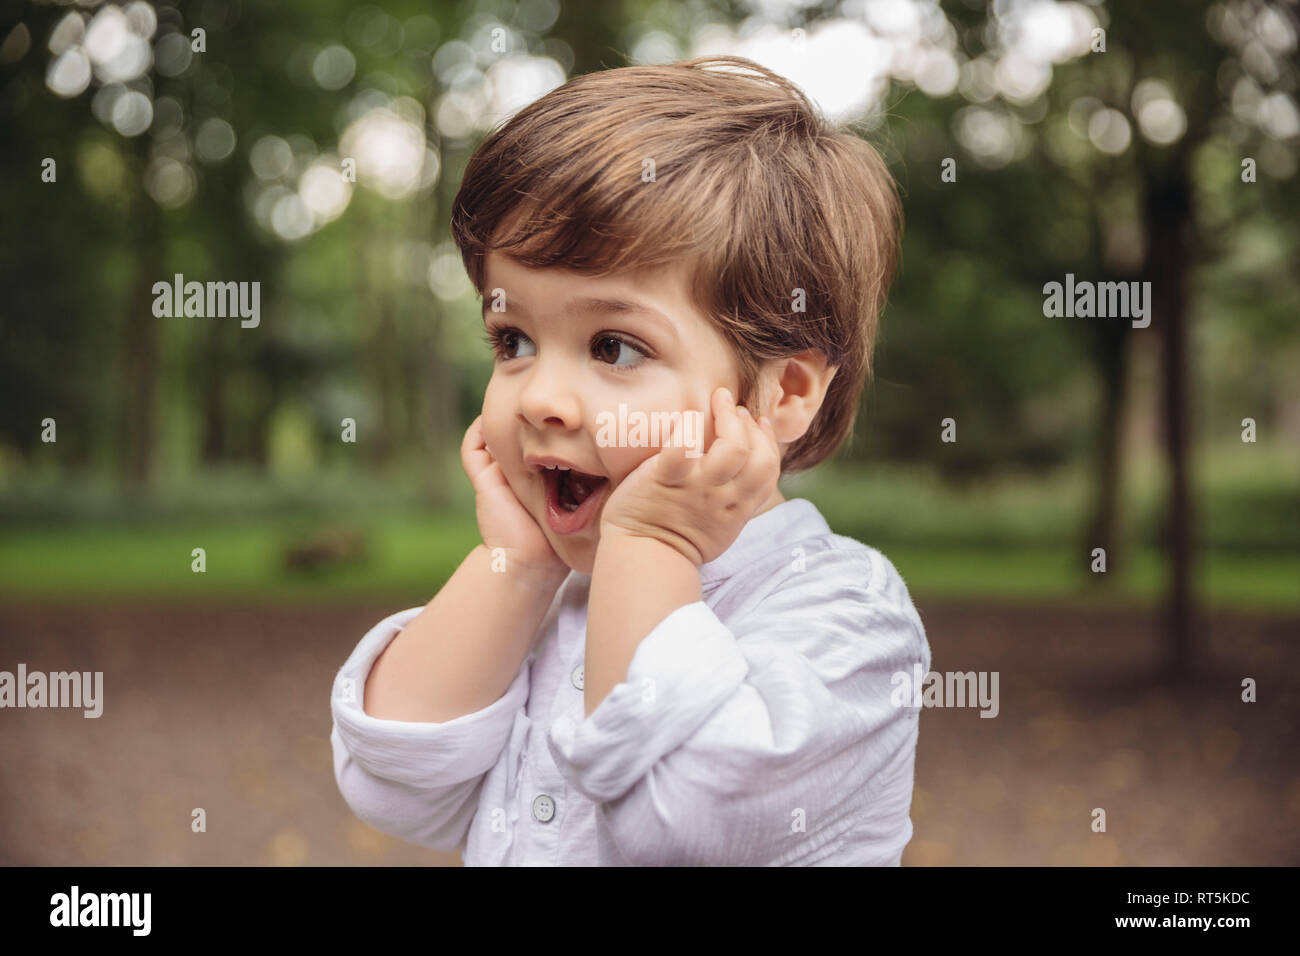 Toddler making surprised face in park Stock Photo